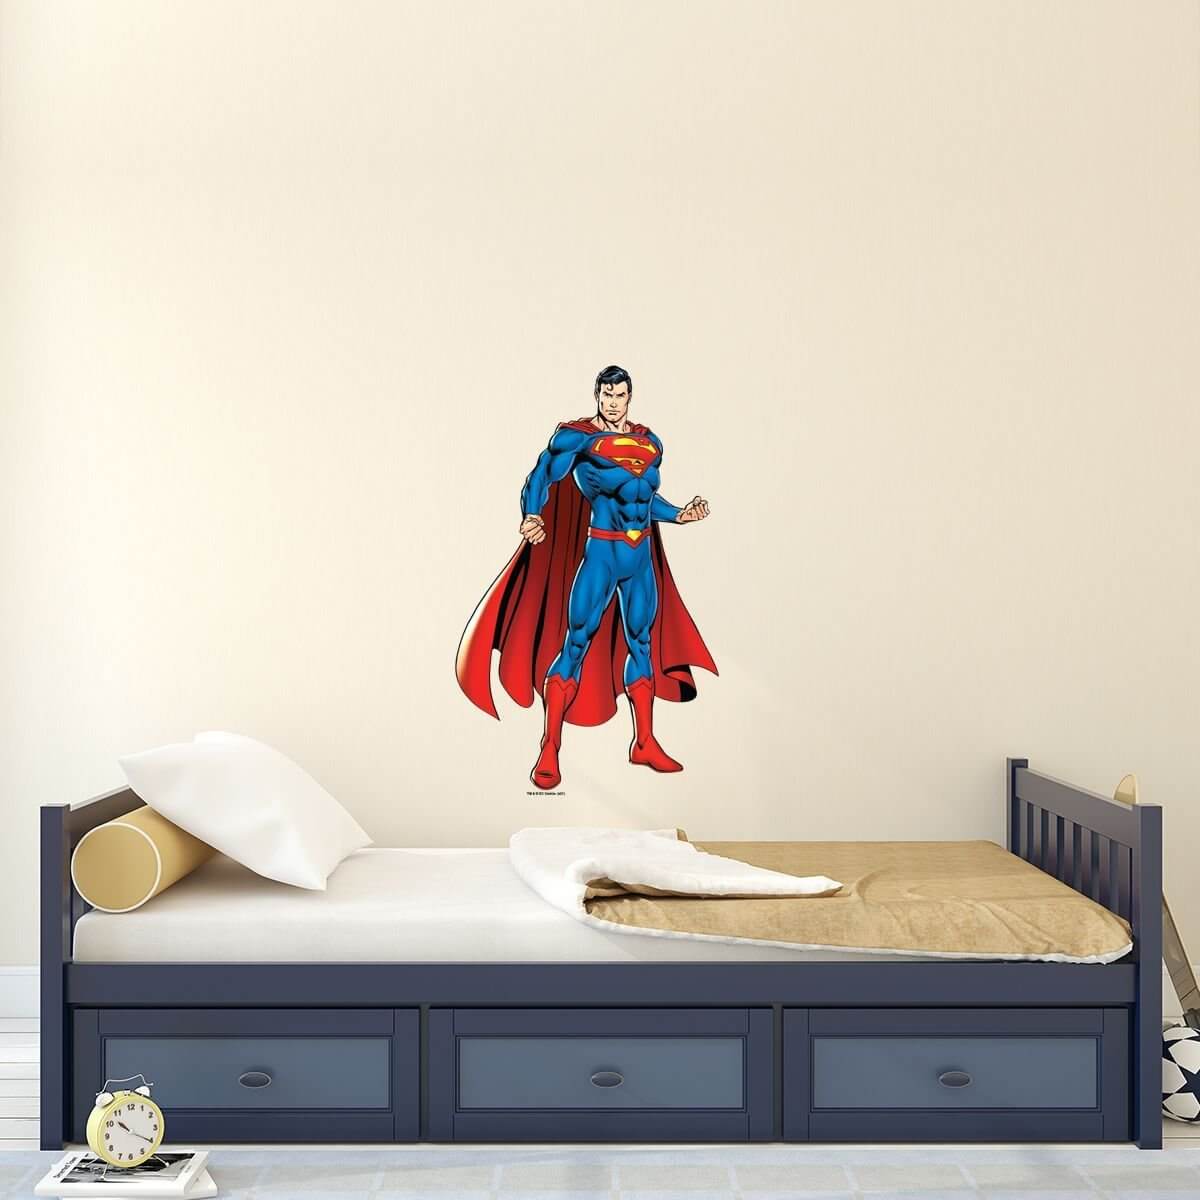 Kismet Decals Superman the Protector Licensed Wall Sticker - Easy DIY Justice League Home & Room Decor Wall Art - Kismet Decals